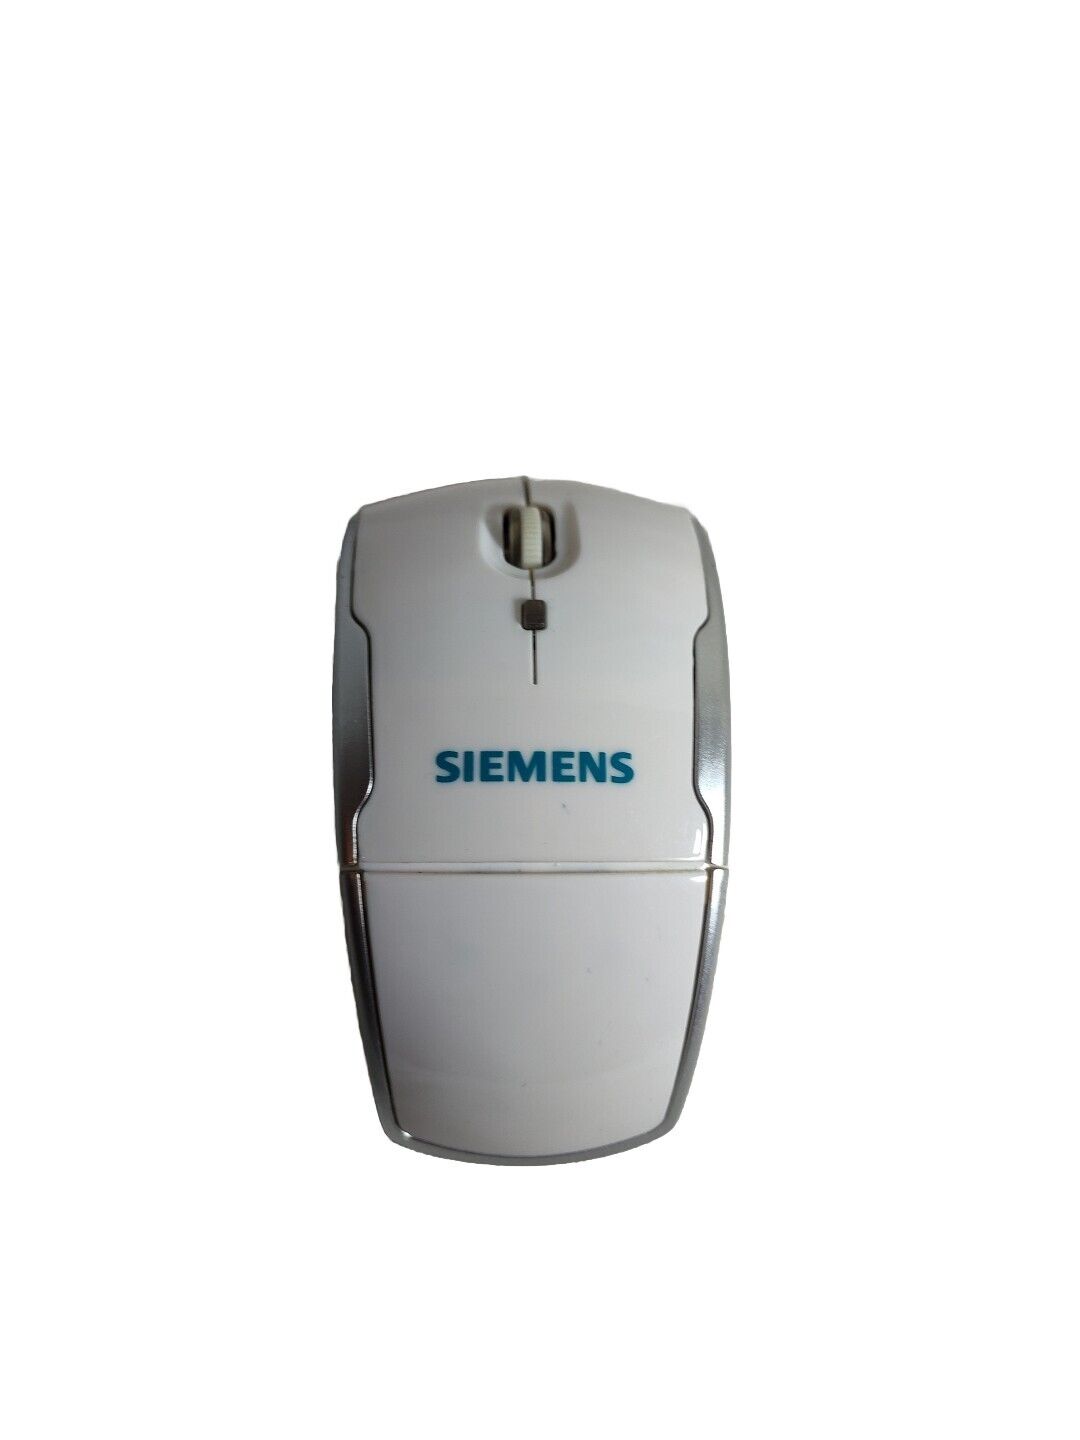 White Siemens 2.4 G Wireless Optical Mouse